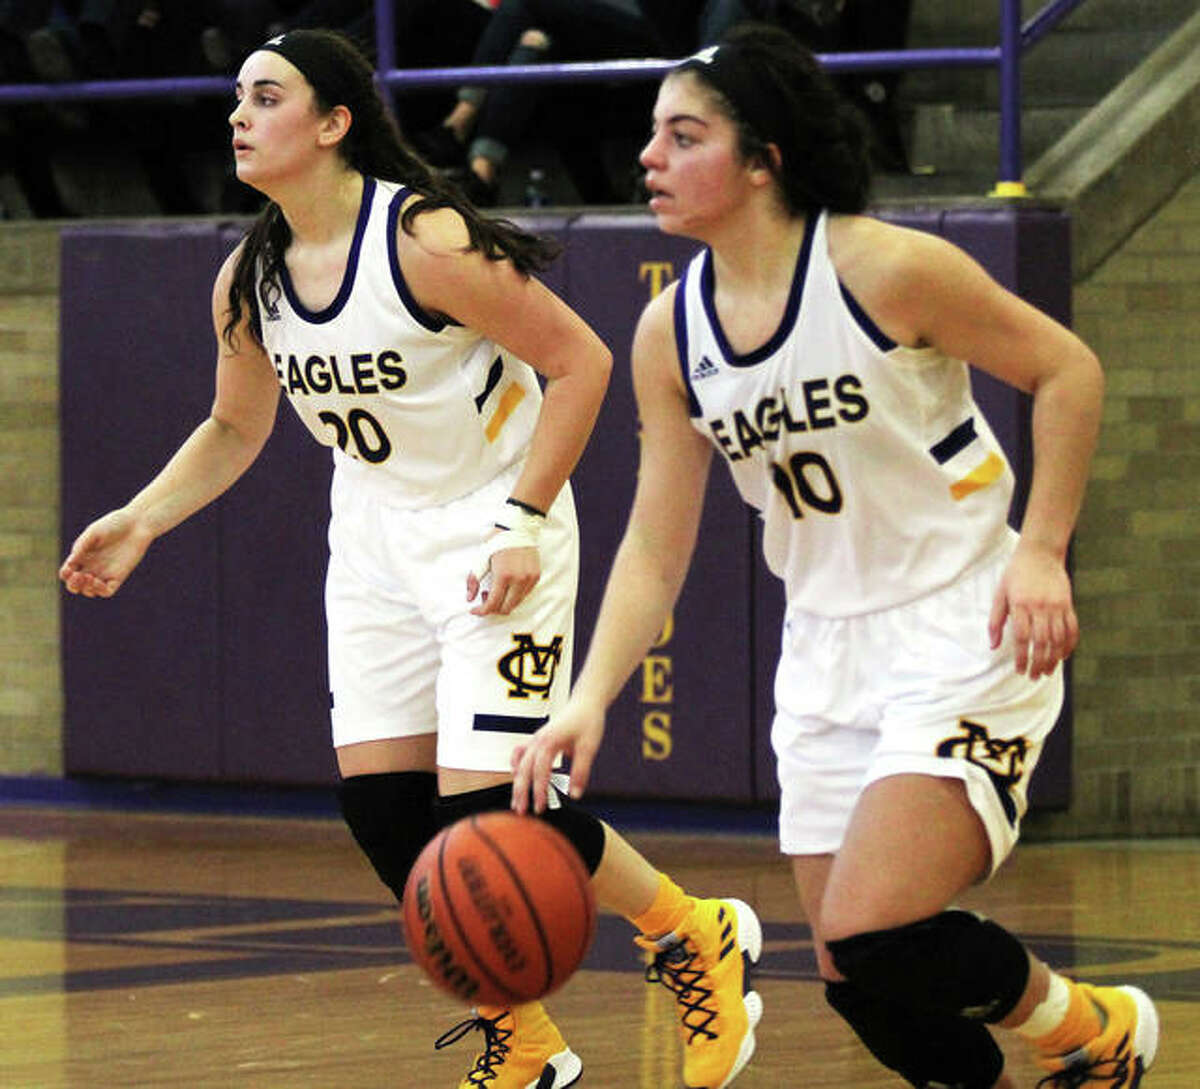 CM’s Kourtland Tyus (right) and Anna Hall bring the ball upcourt in a game last season at the Taylorville Tournament. Now back for their senior season, Tyus and Hall get their last shot at an elusive state tourney trip for the Eagles.